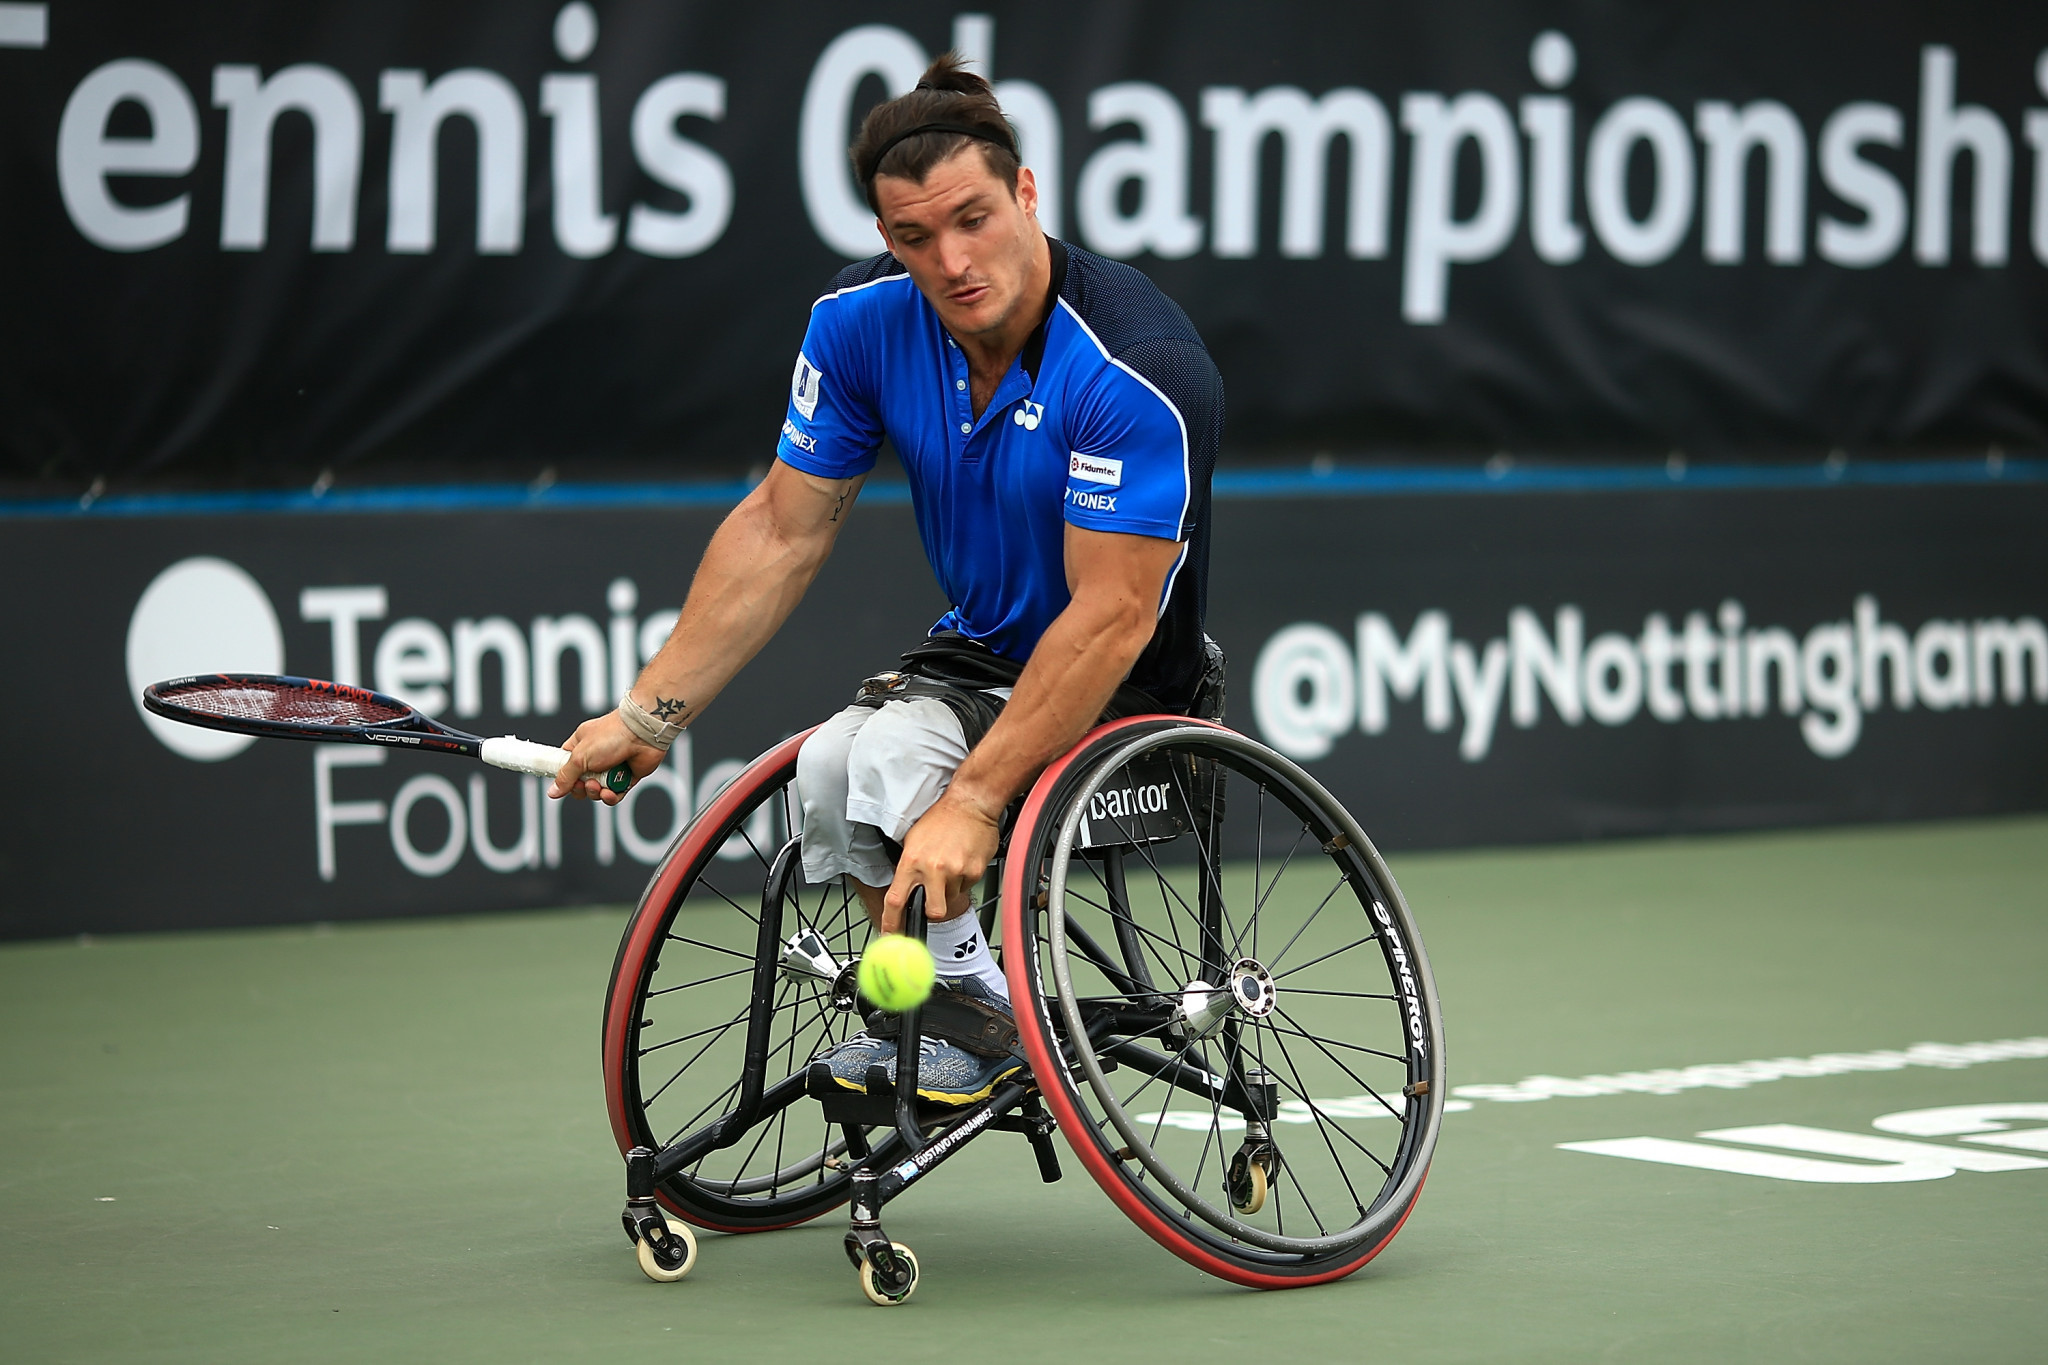 Argentinean wheelchair tennis player Gustavo Fernández has also been nominated ©Getty Images